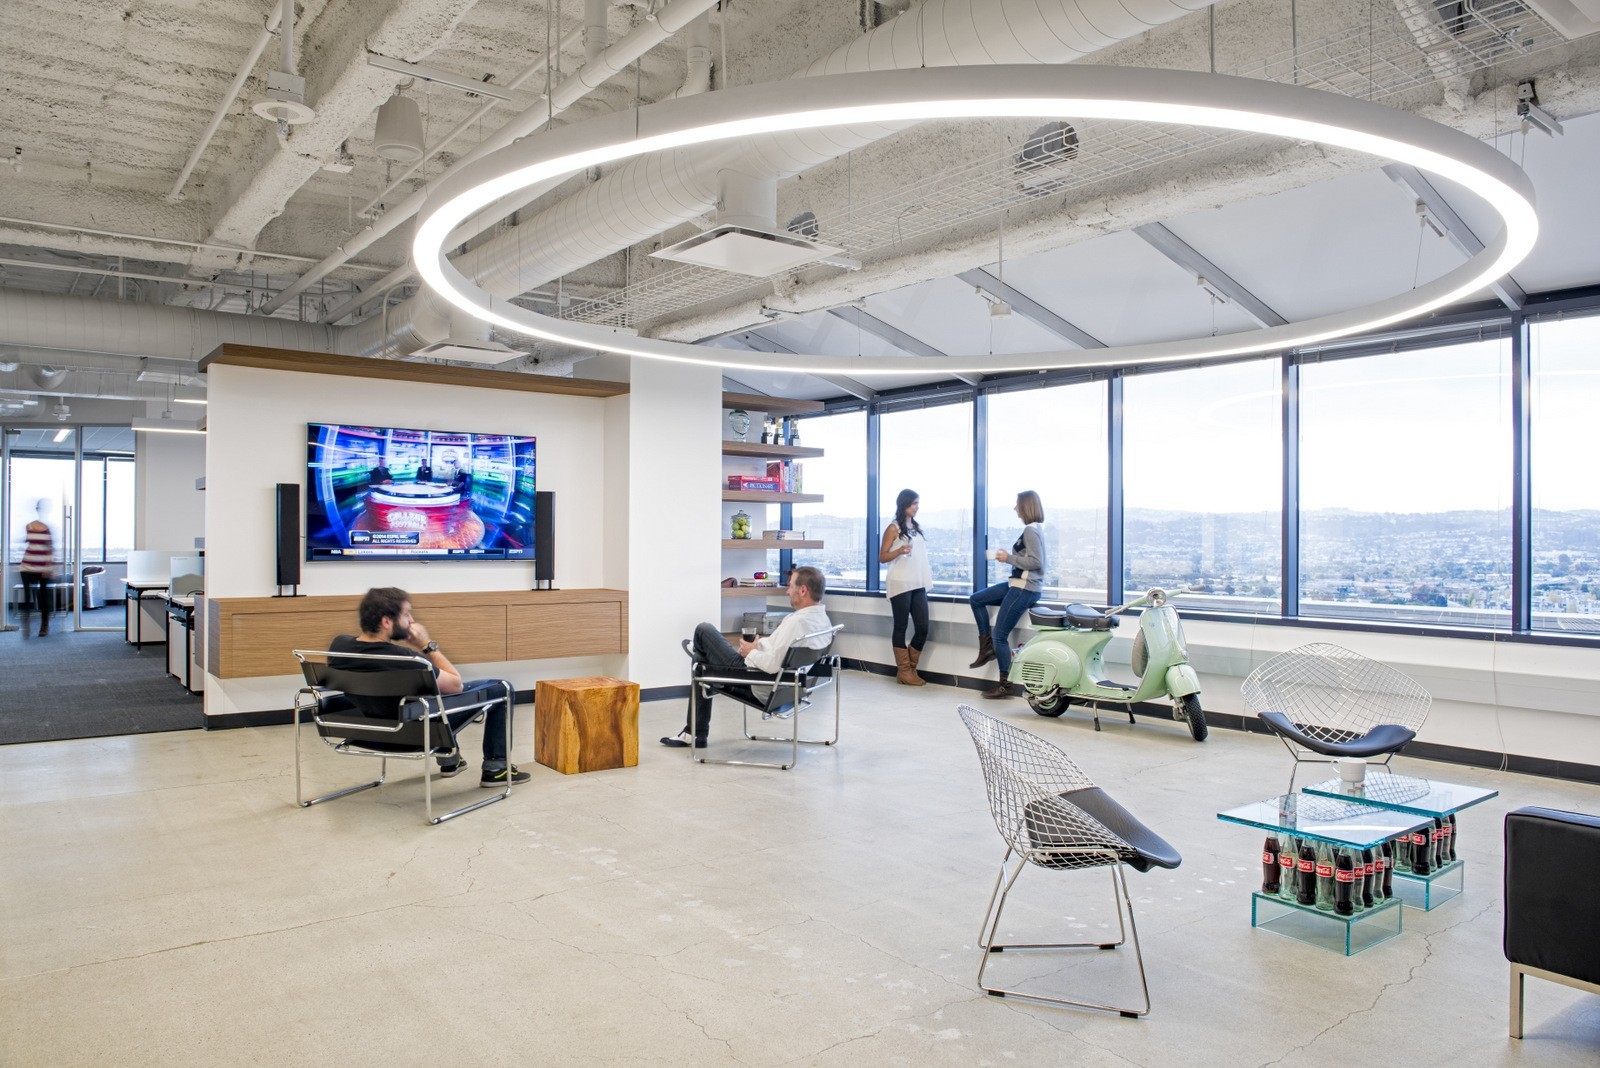 A Look Inside Amobee’s Stylish Silicon Valley Headquarters